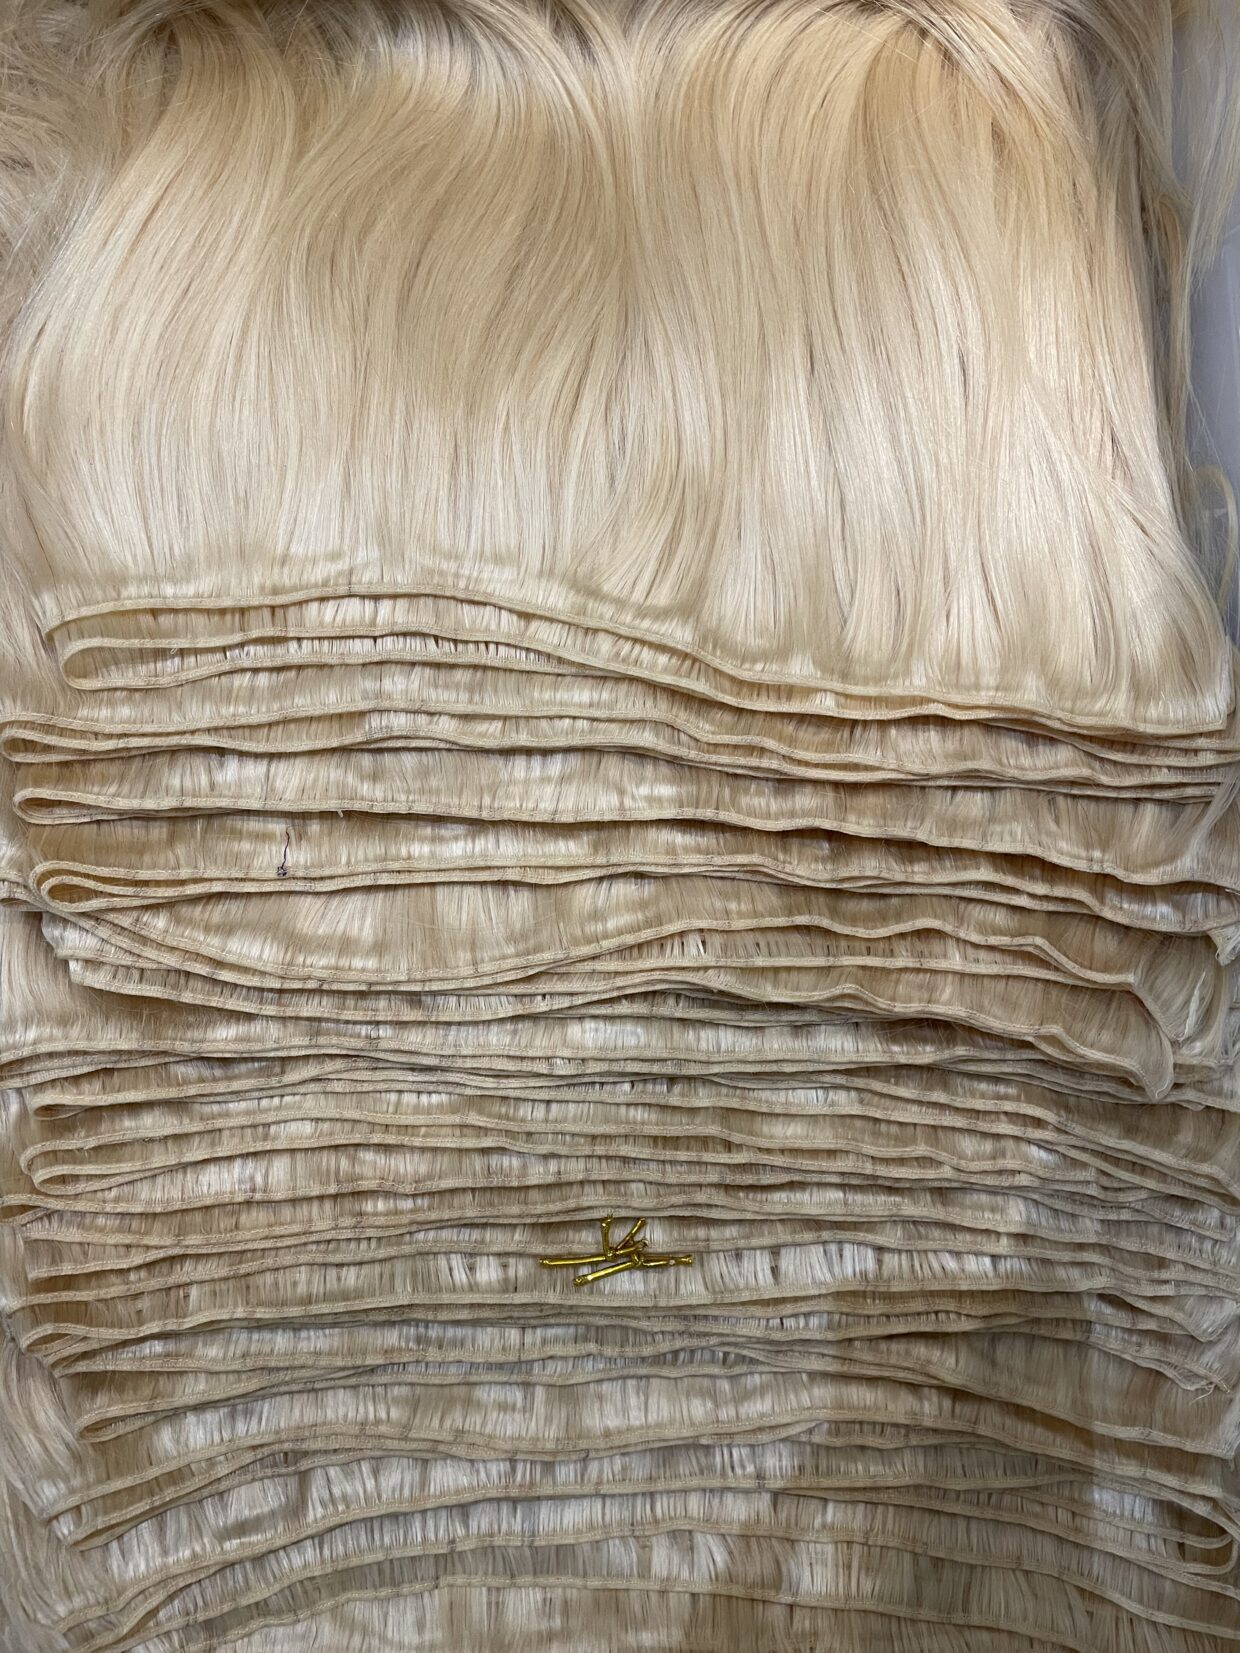 Hair wefts for Doja Cat's Coachella '24 weekend 1 performance by Charlie Le Mindu and team.